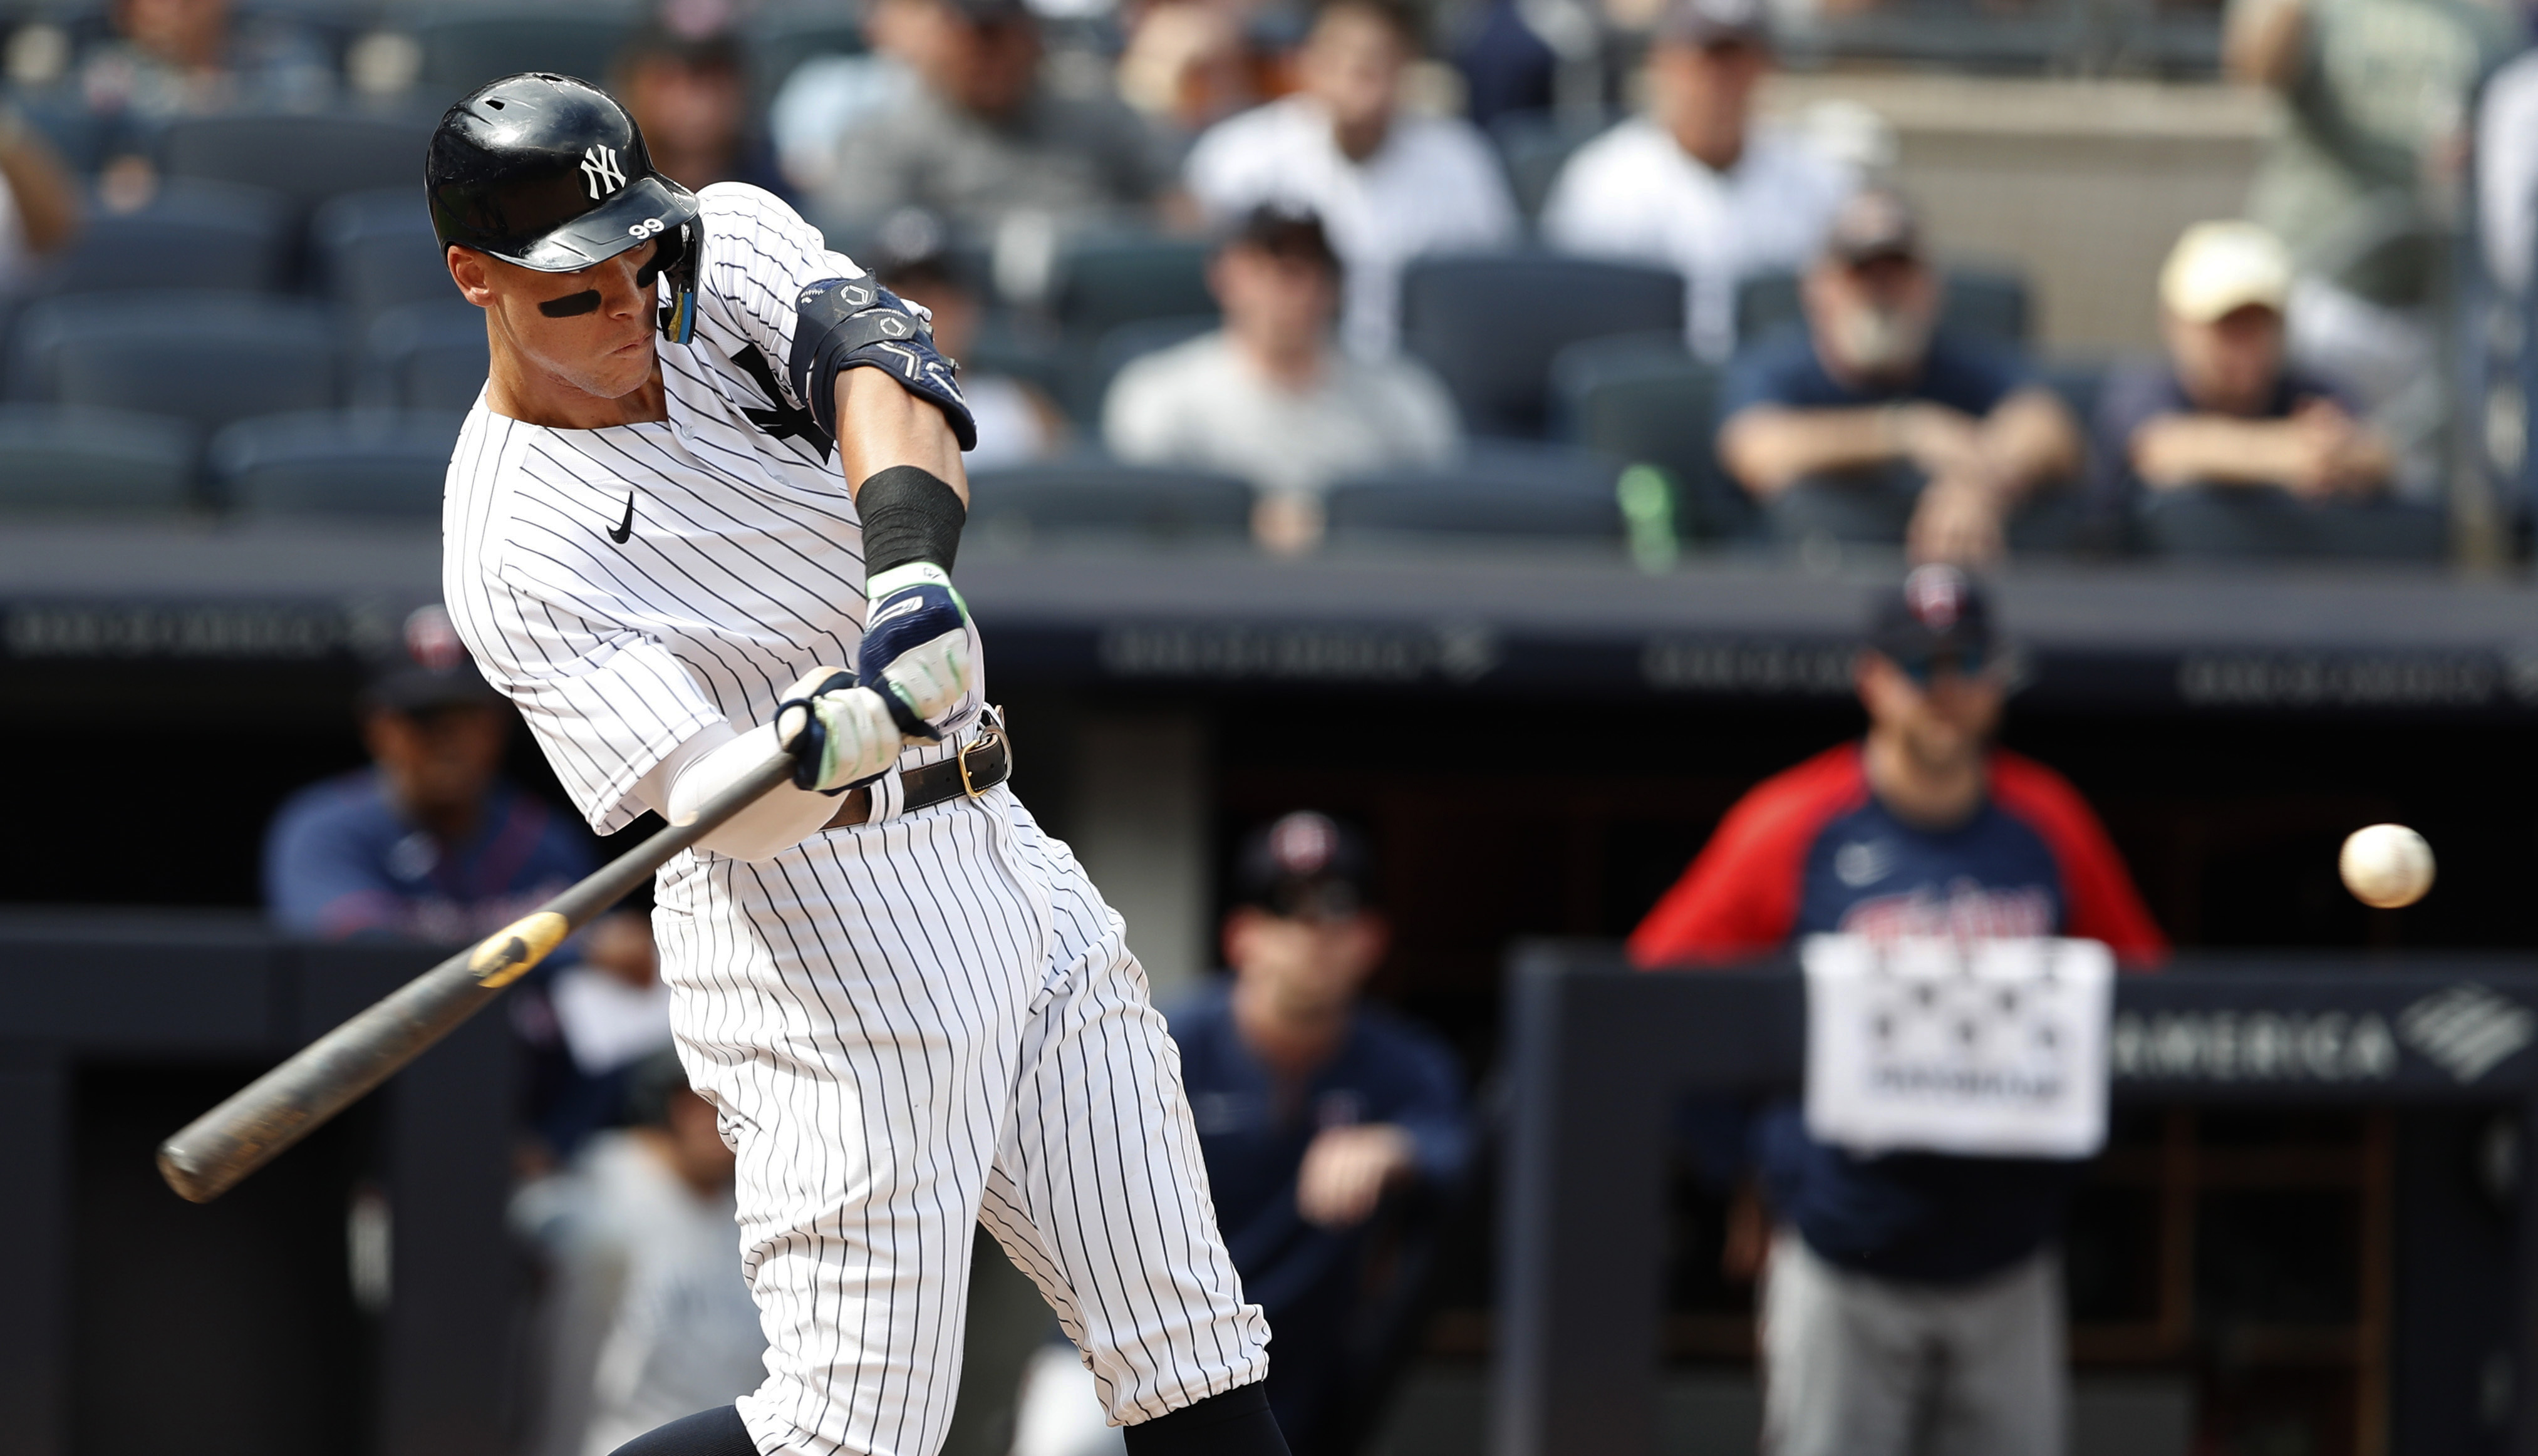 Aaron Judge: Will New York Yankees' star be ready for start of season?